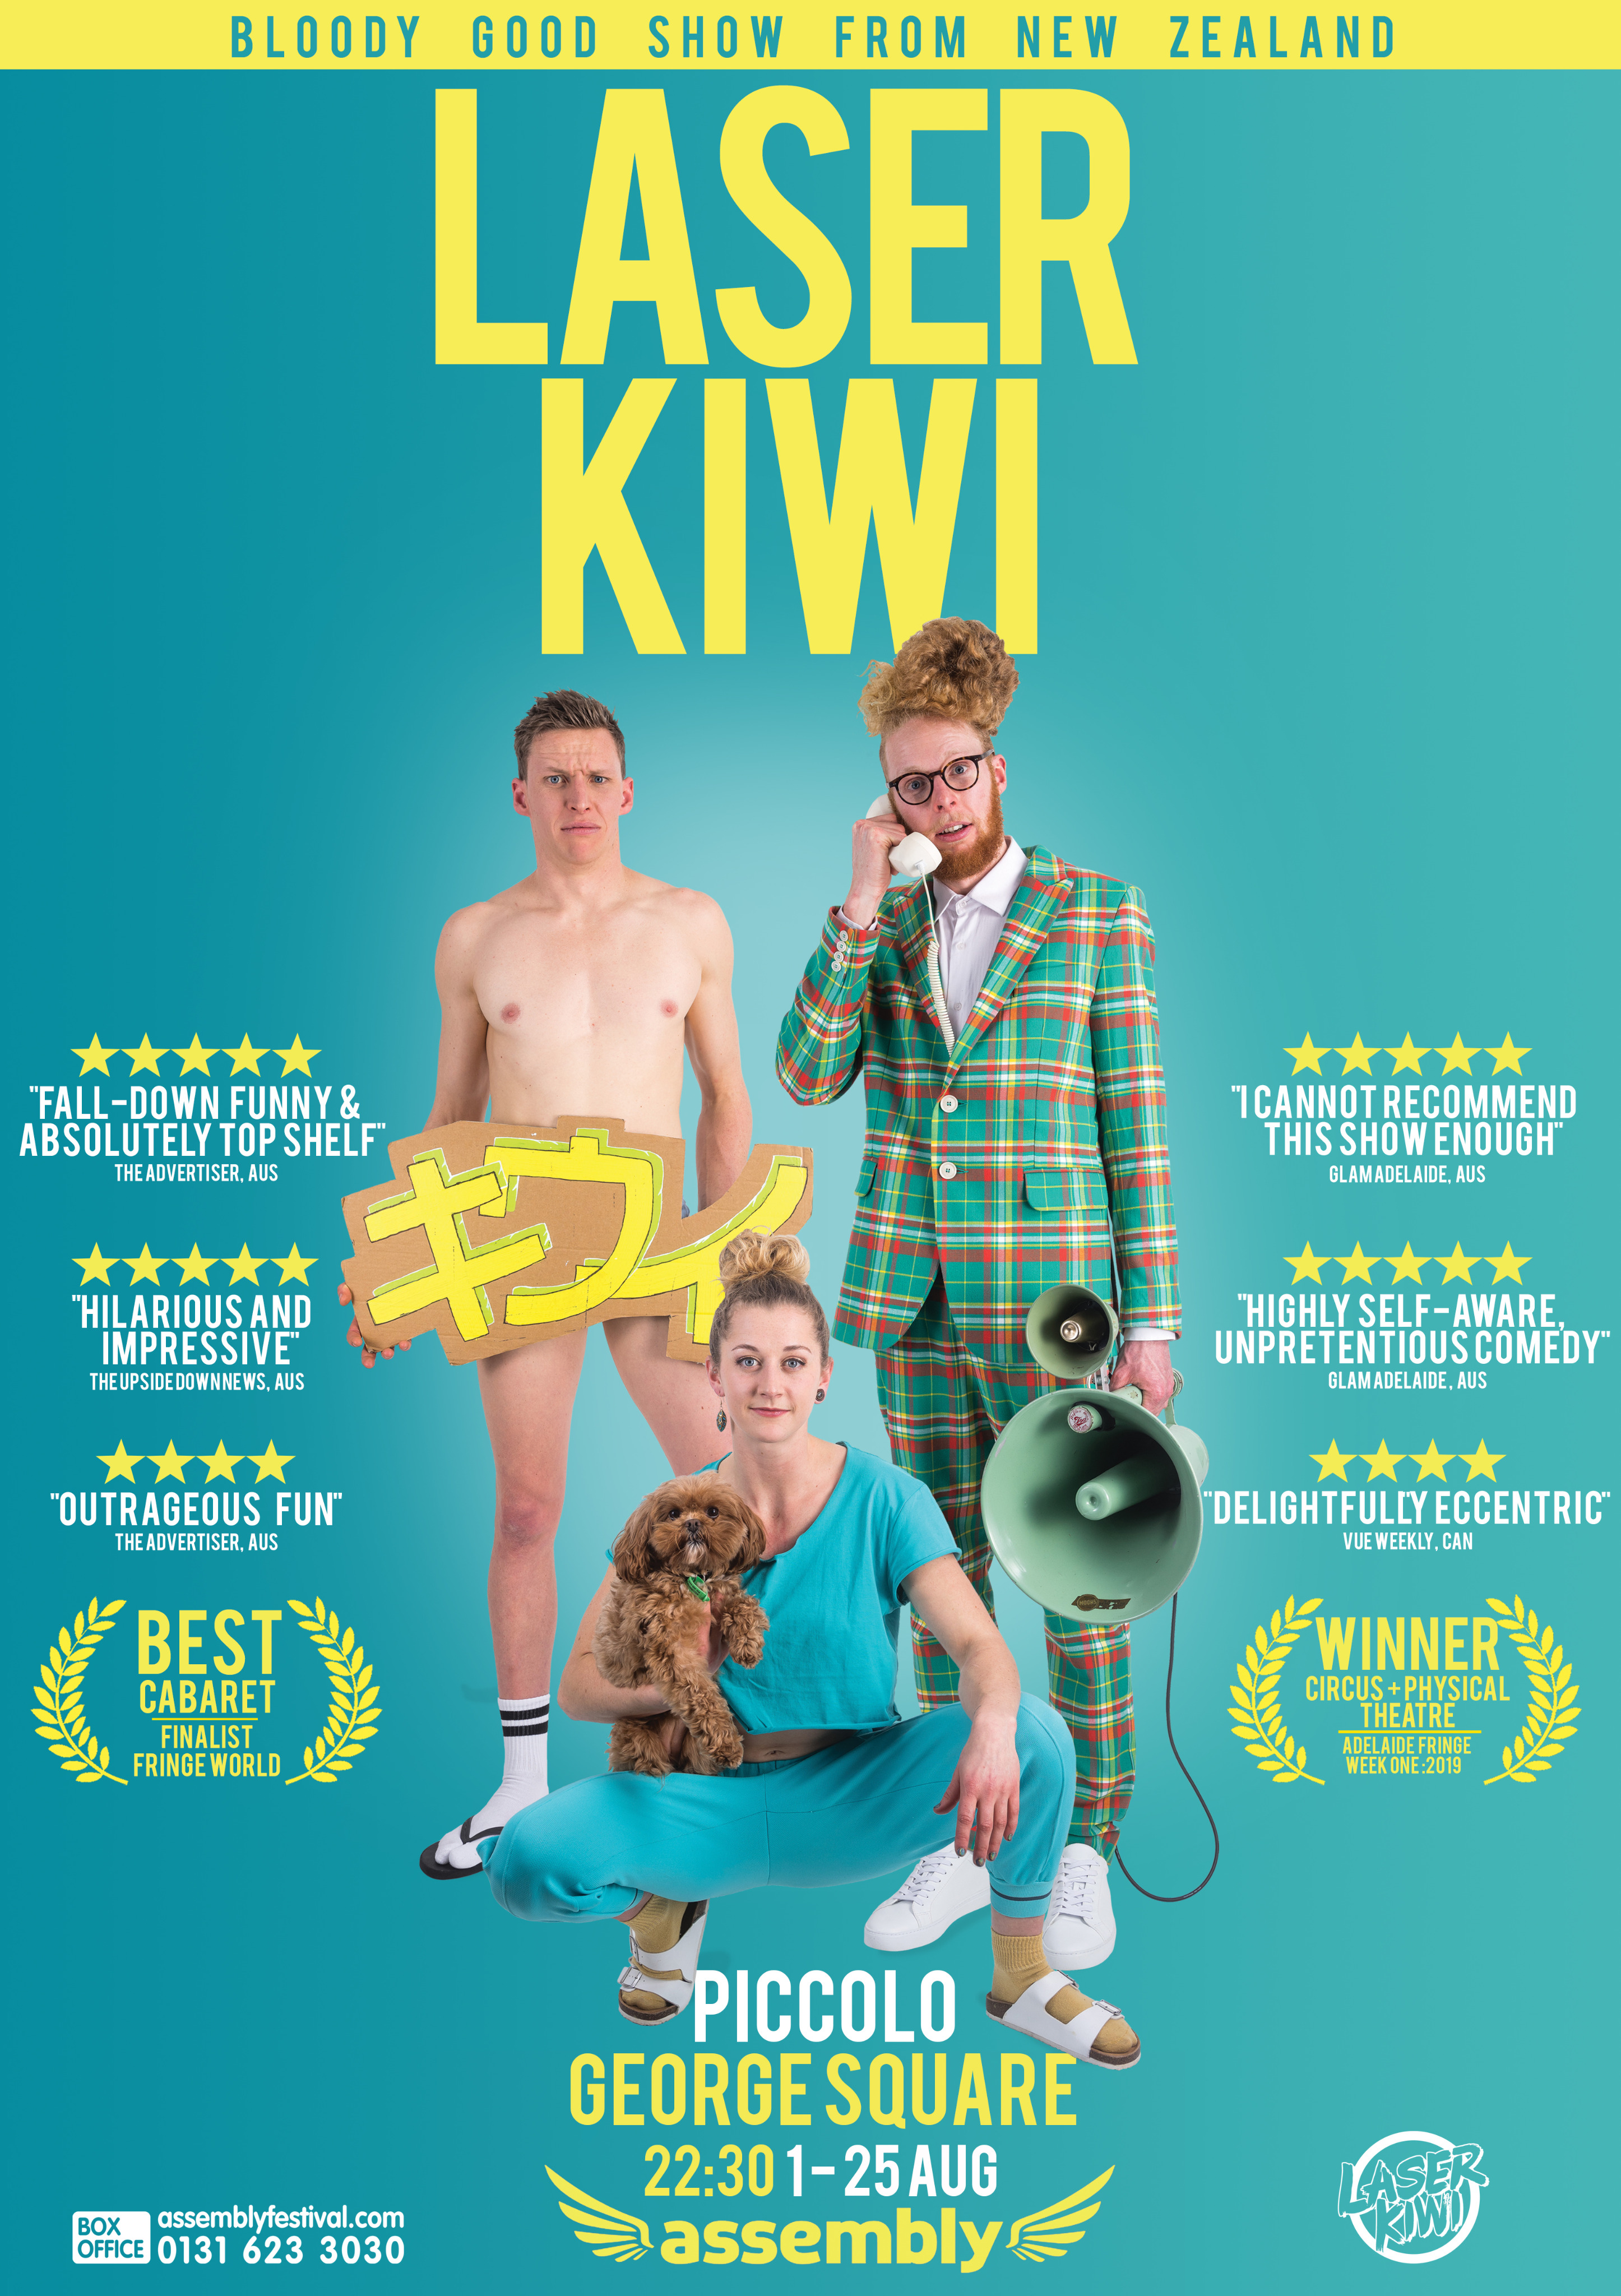 The poster for Laser Kiwi